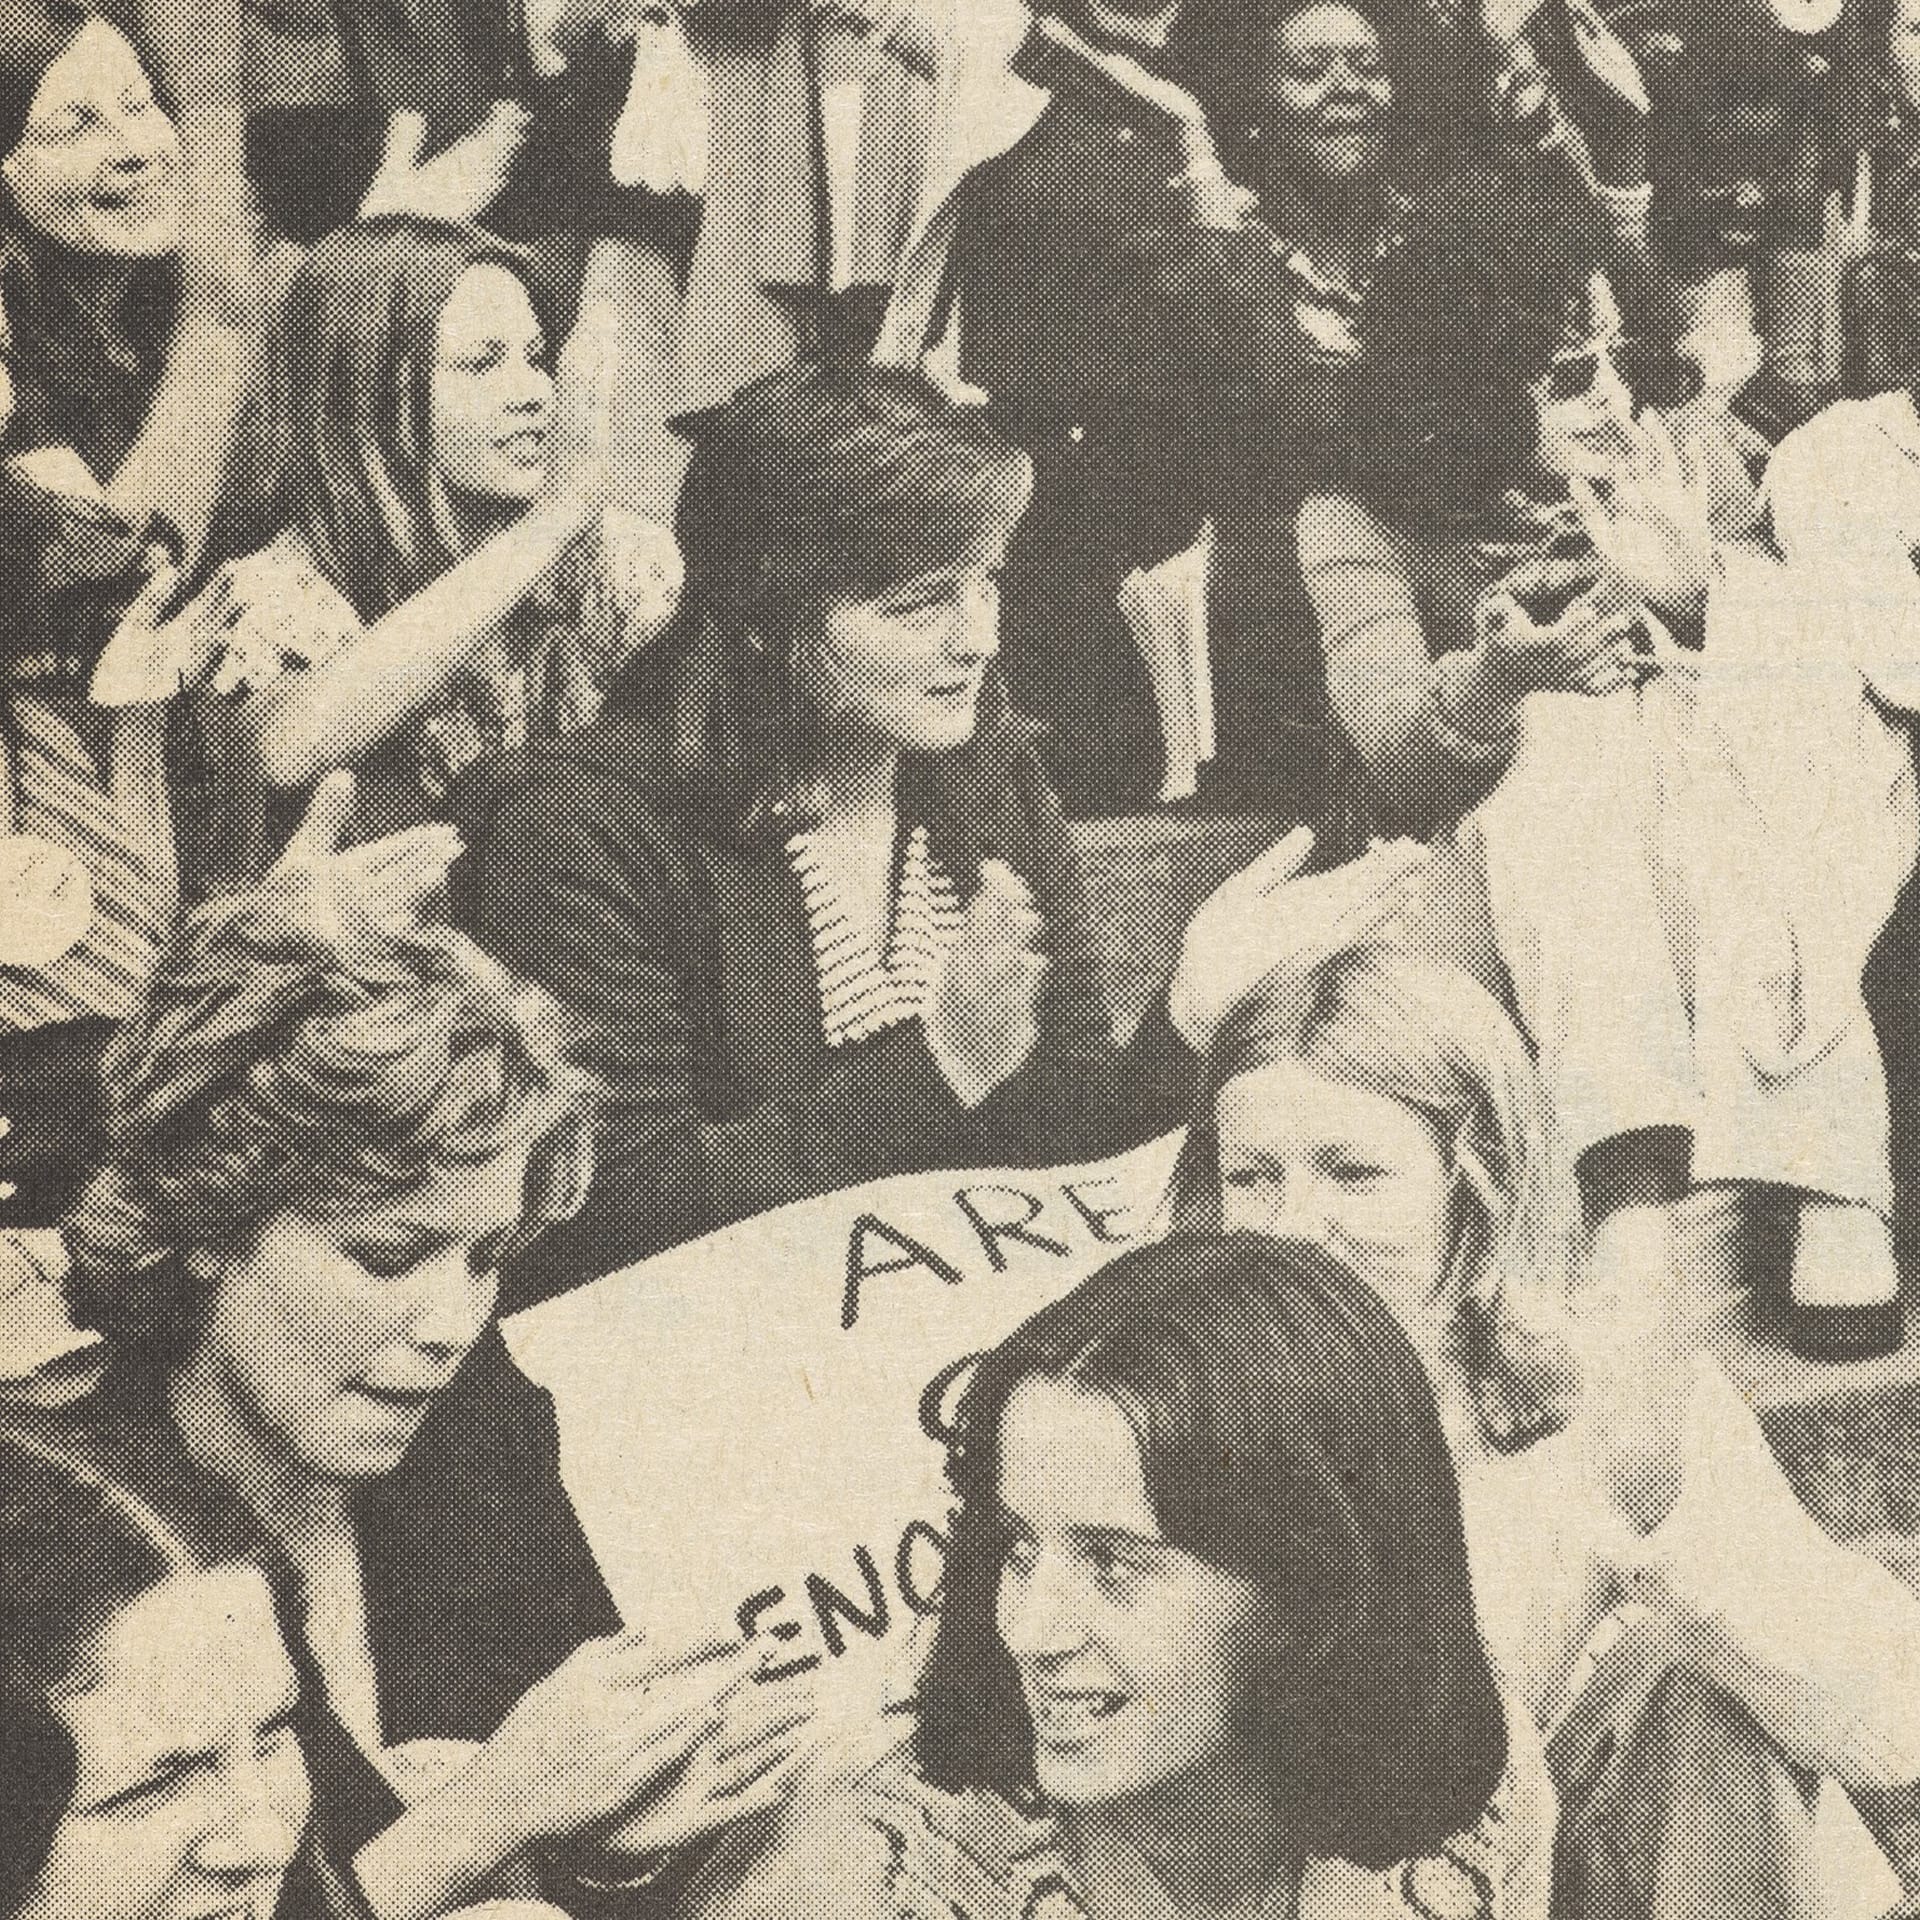 A black and white photo of a group of women holding protest signs